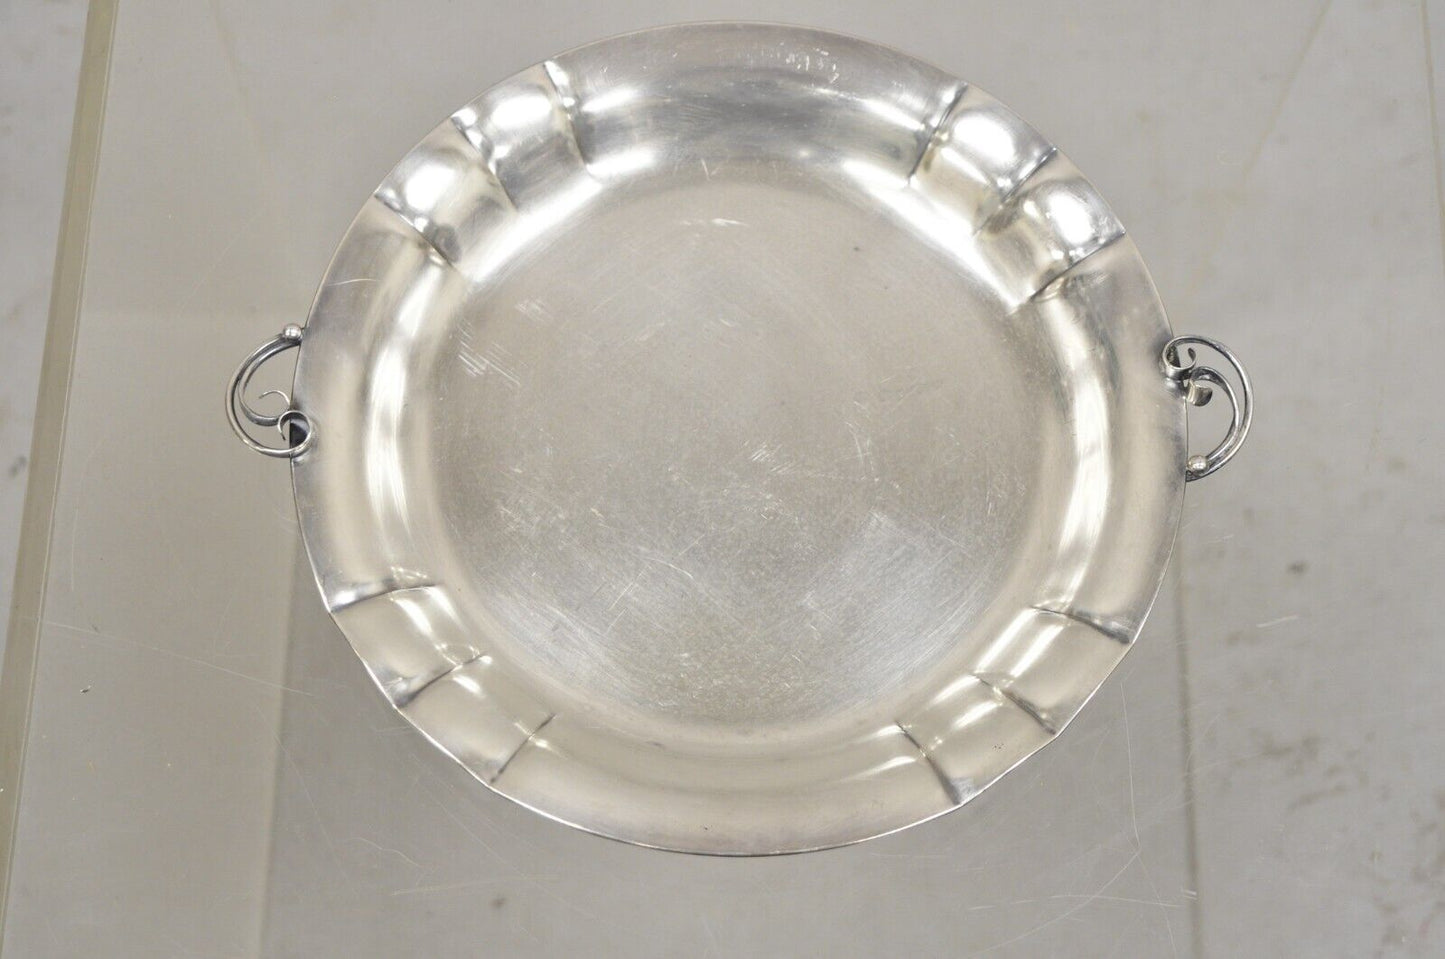 Vintage Denmark Art Nouveau Round Silver Plated Dish with Scrolling Handles